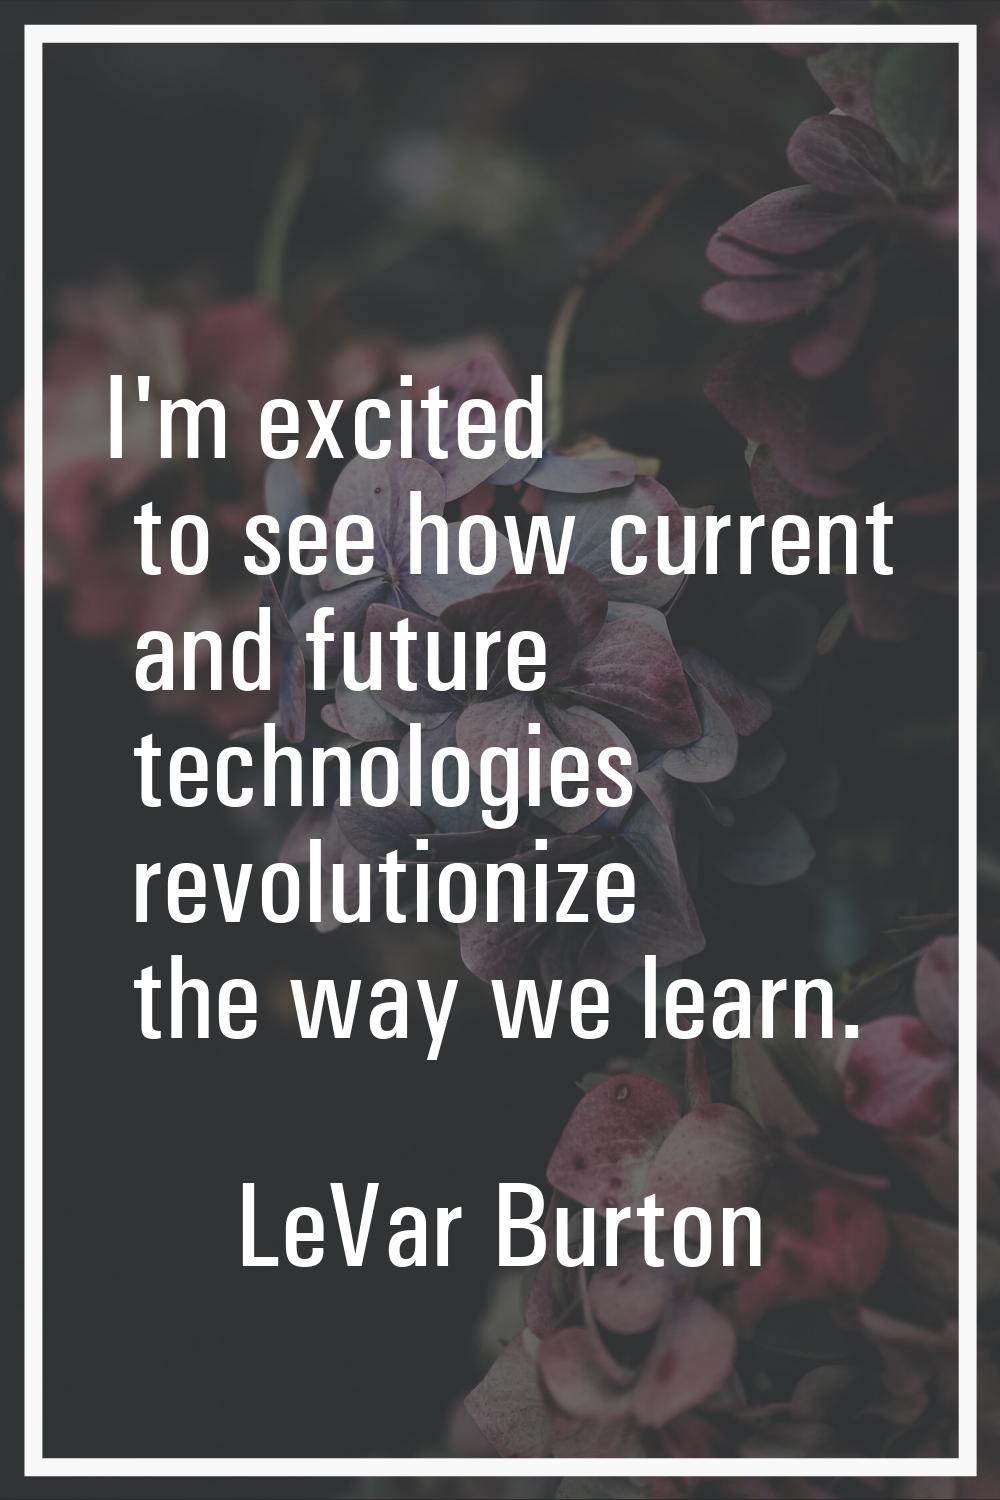 I'm excited to see how current and future technologies revolutionize the way we learn.